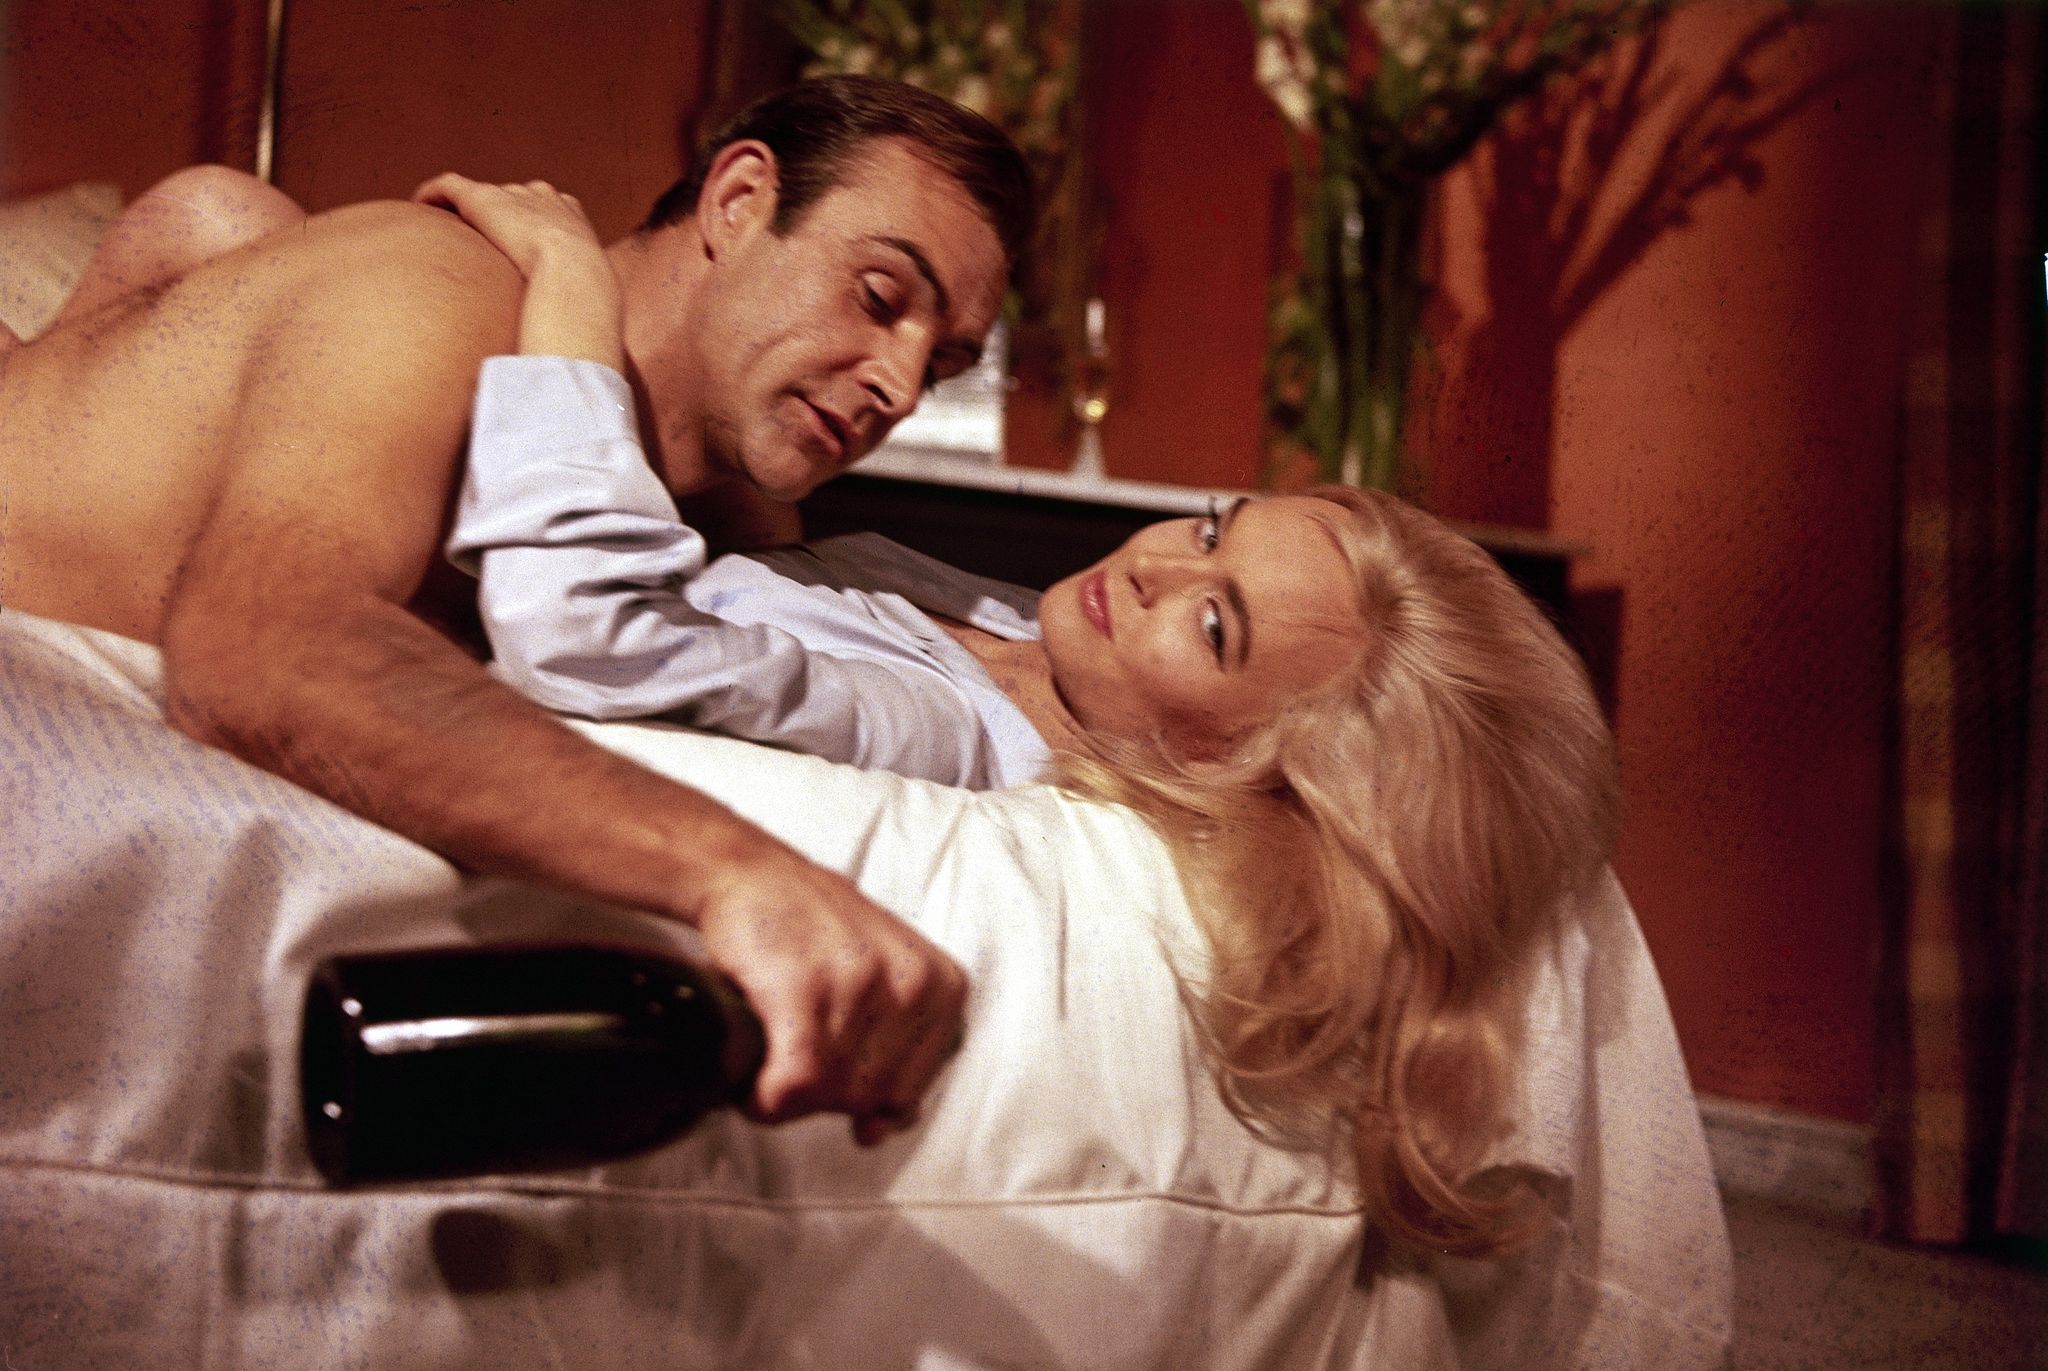 sean connery, shirley eaton in "goldfinger" 1964 photo by rdbullstein bild via getty images